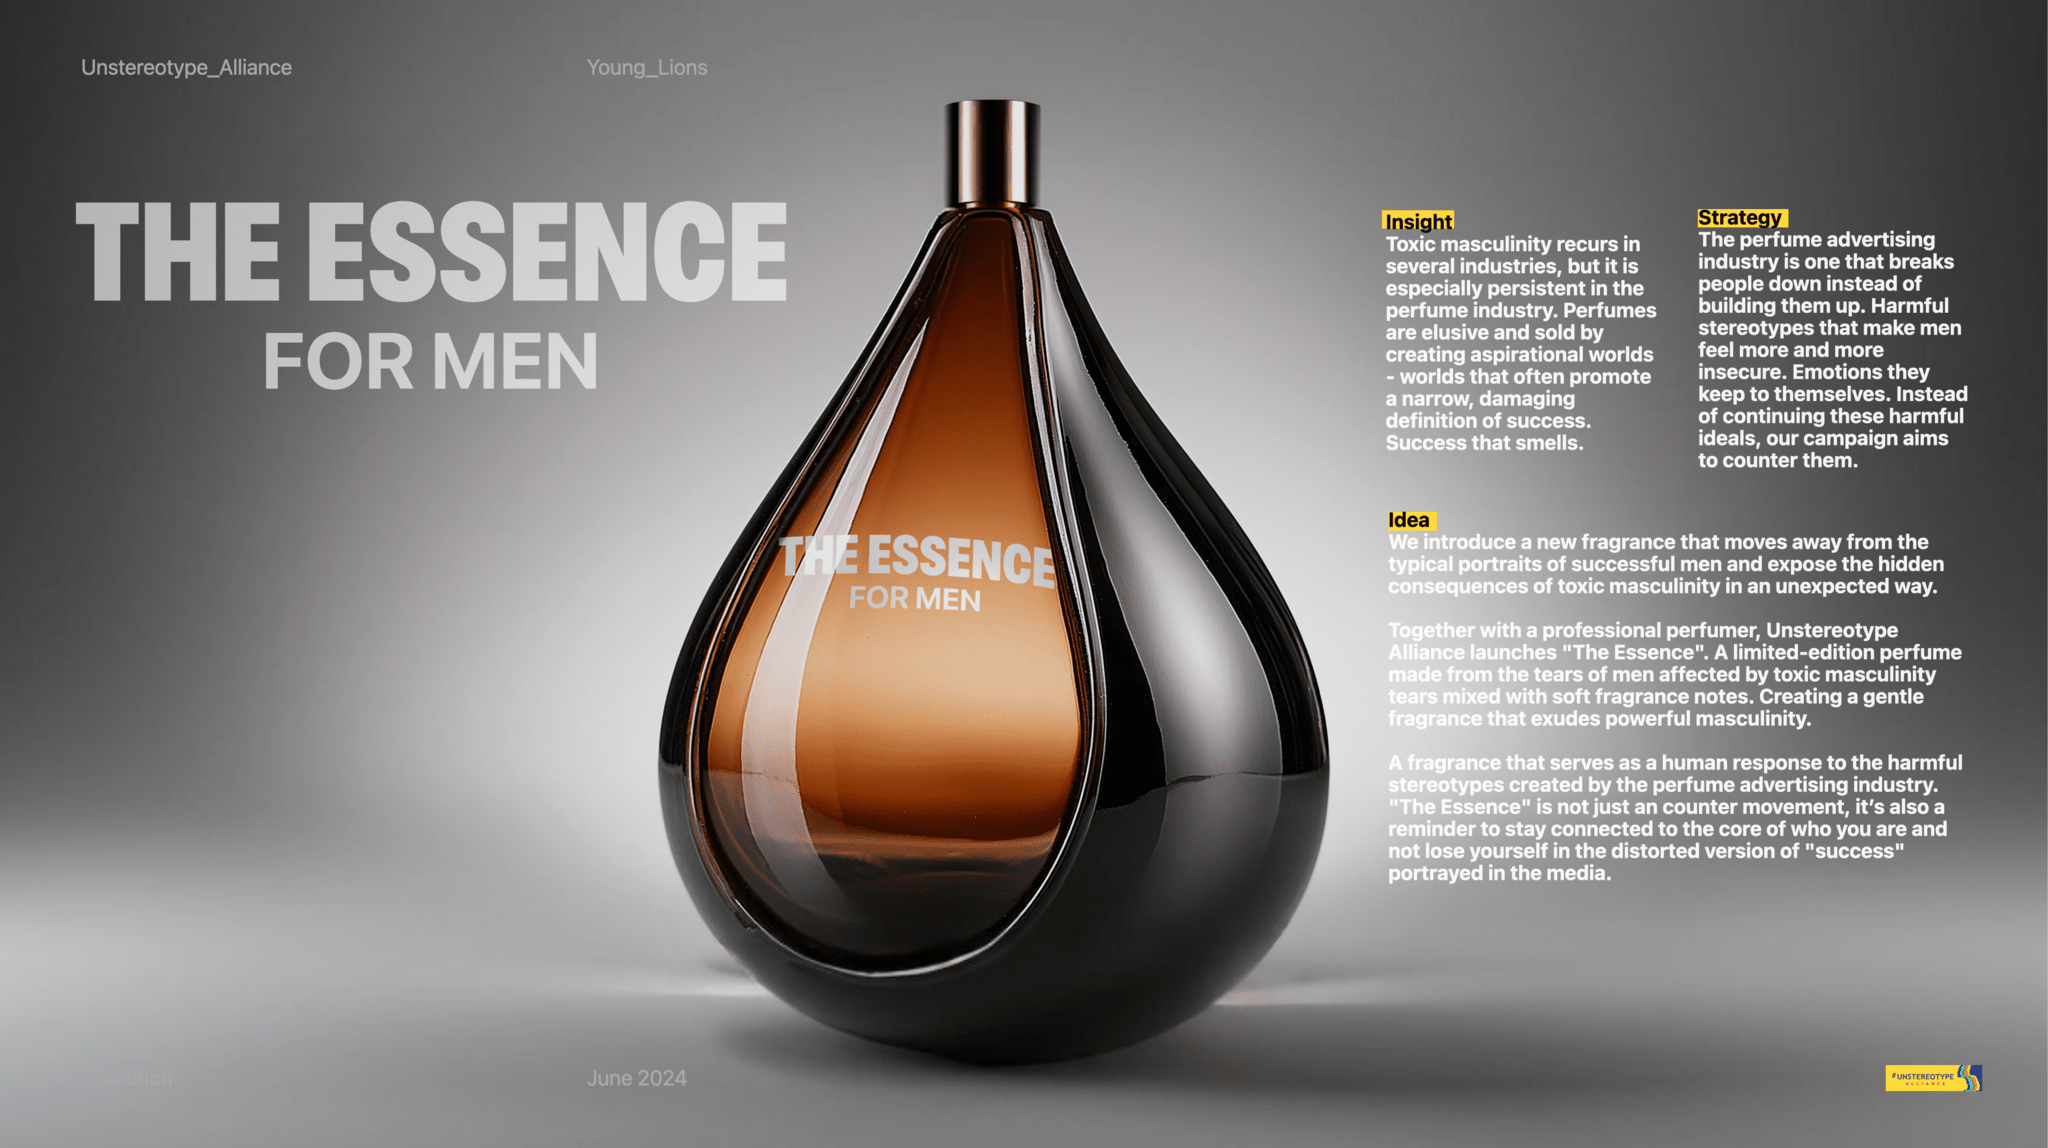 The essence, for men.